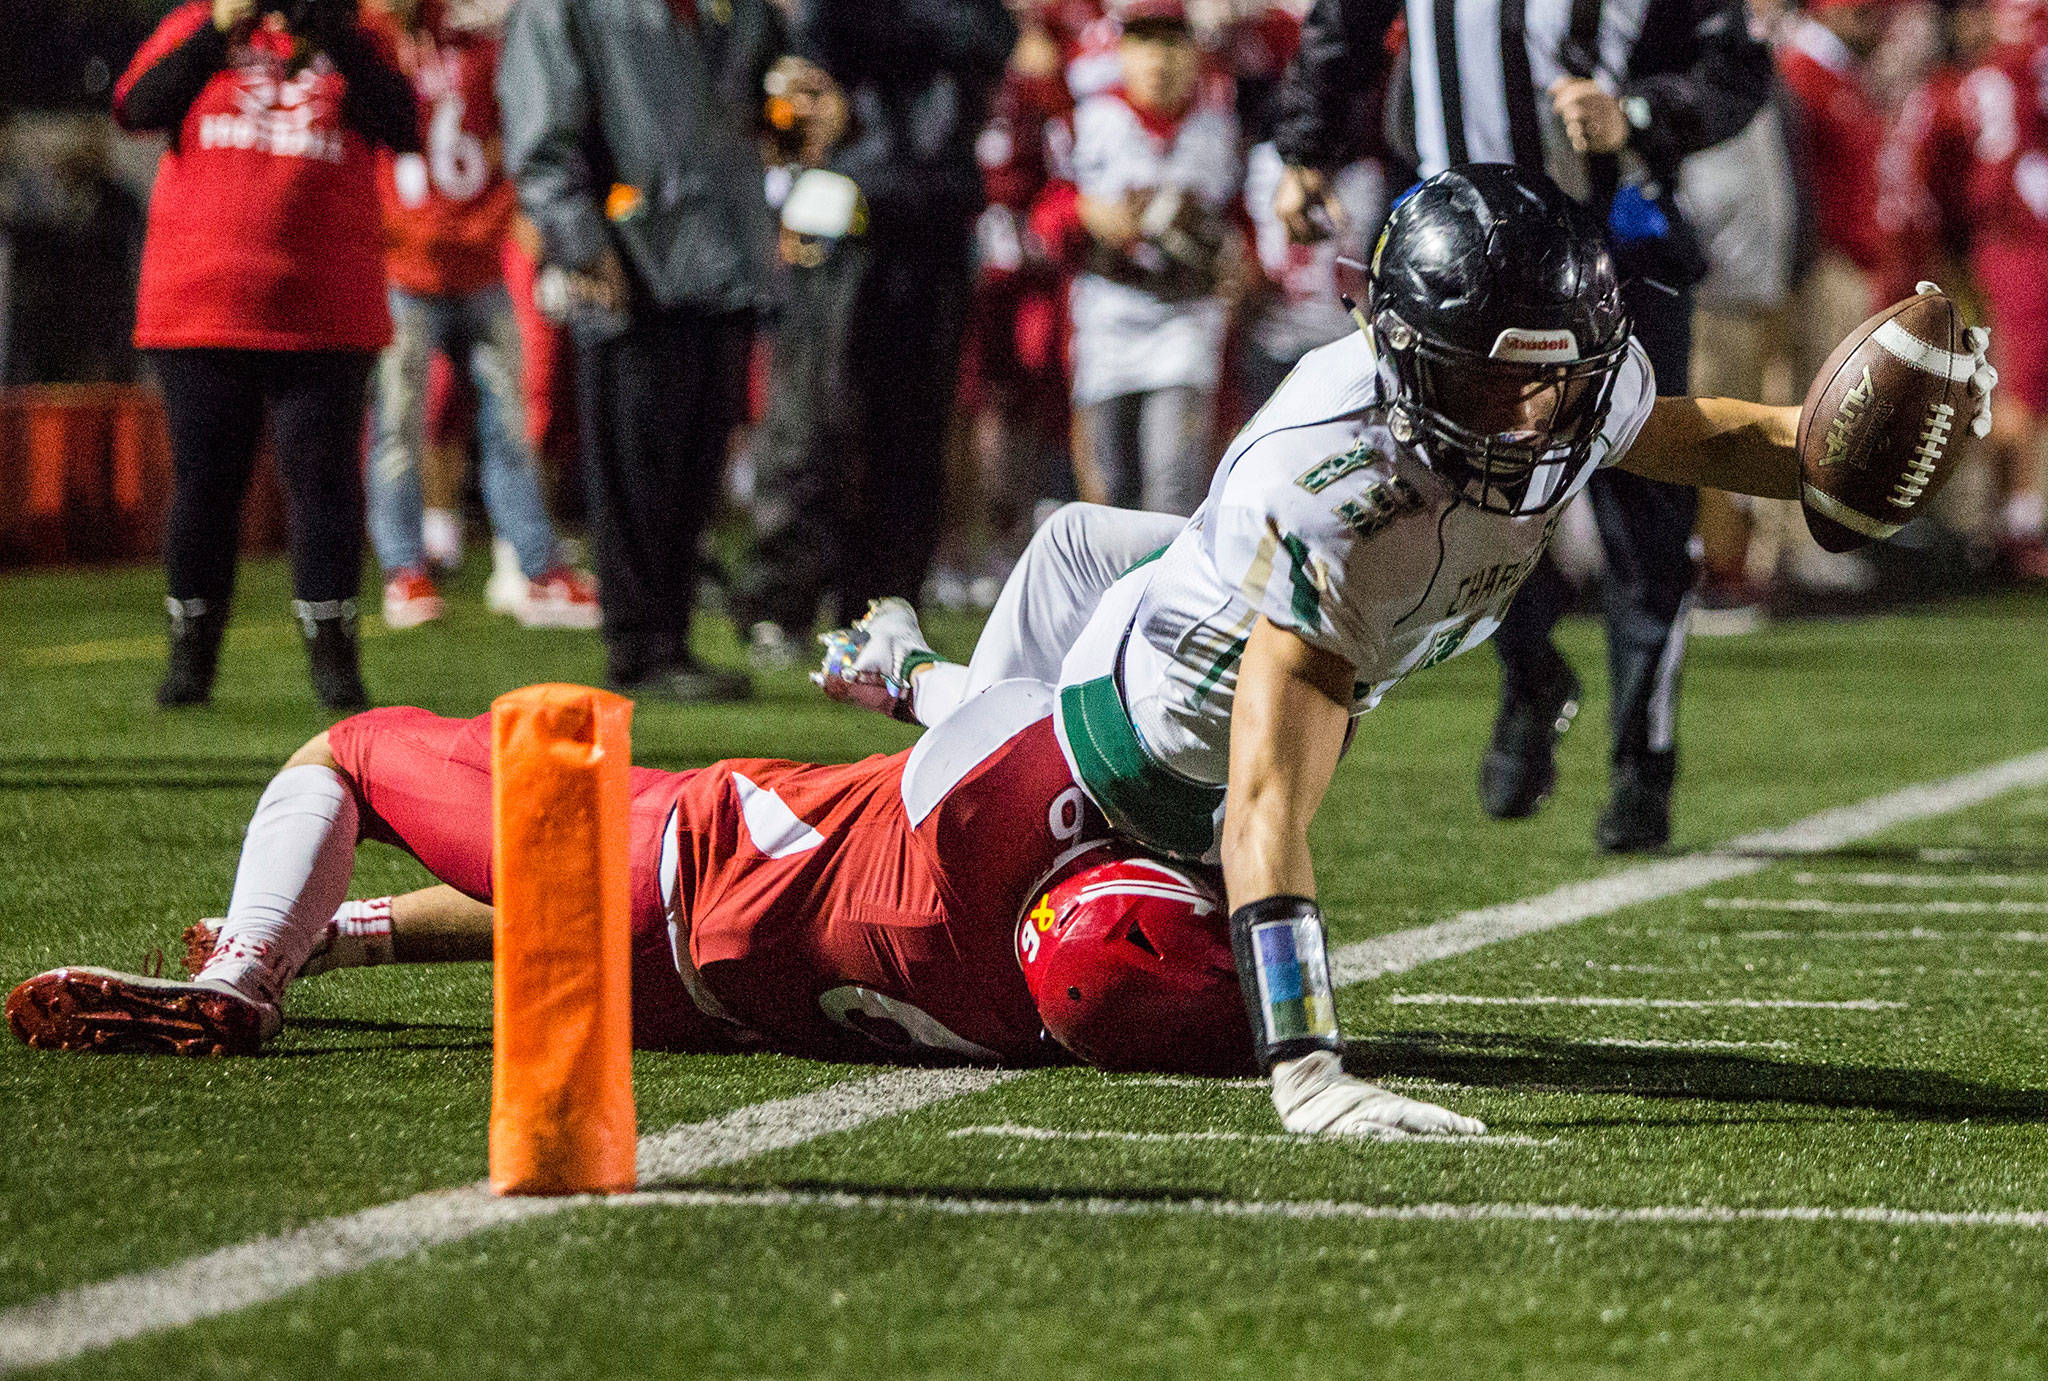 Marysville Getchell’s Dylan Rice is tackled out of bounds as he reaches for the end zone during the game on Oct. 5, 2018 in Marysville. The Chargers are looking for their first Berry Bowl victory after losing the first seven contests with rival Marysville Pilchuck. (Olivia Vanni / The Herald)